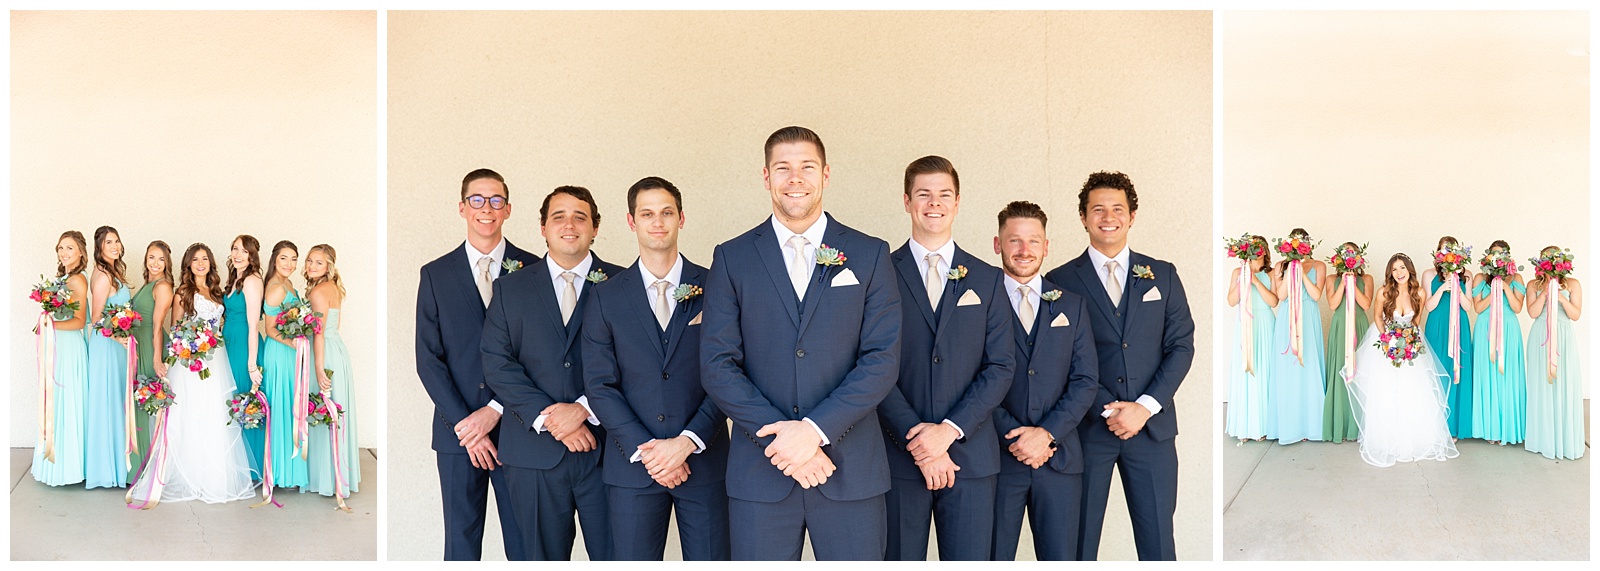 blue bridesmaid dresses and groomsmen suits , photos by riane roberts